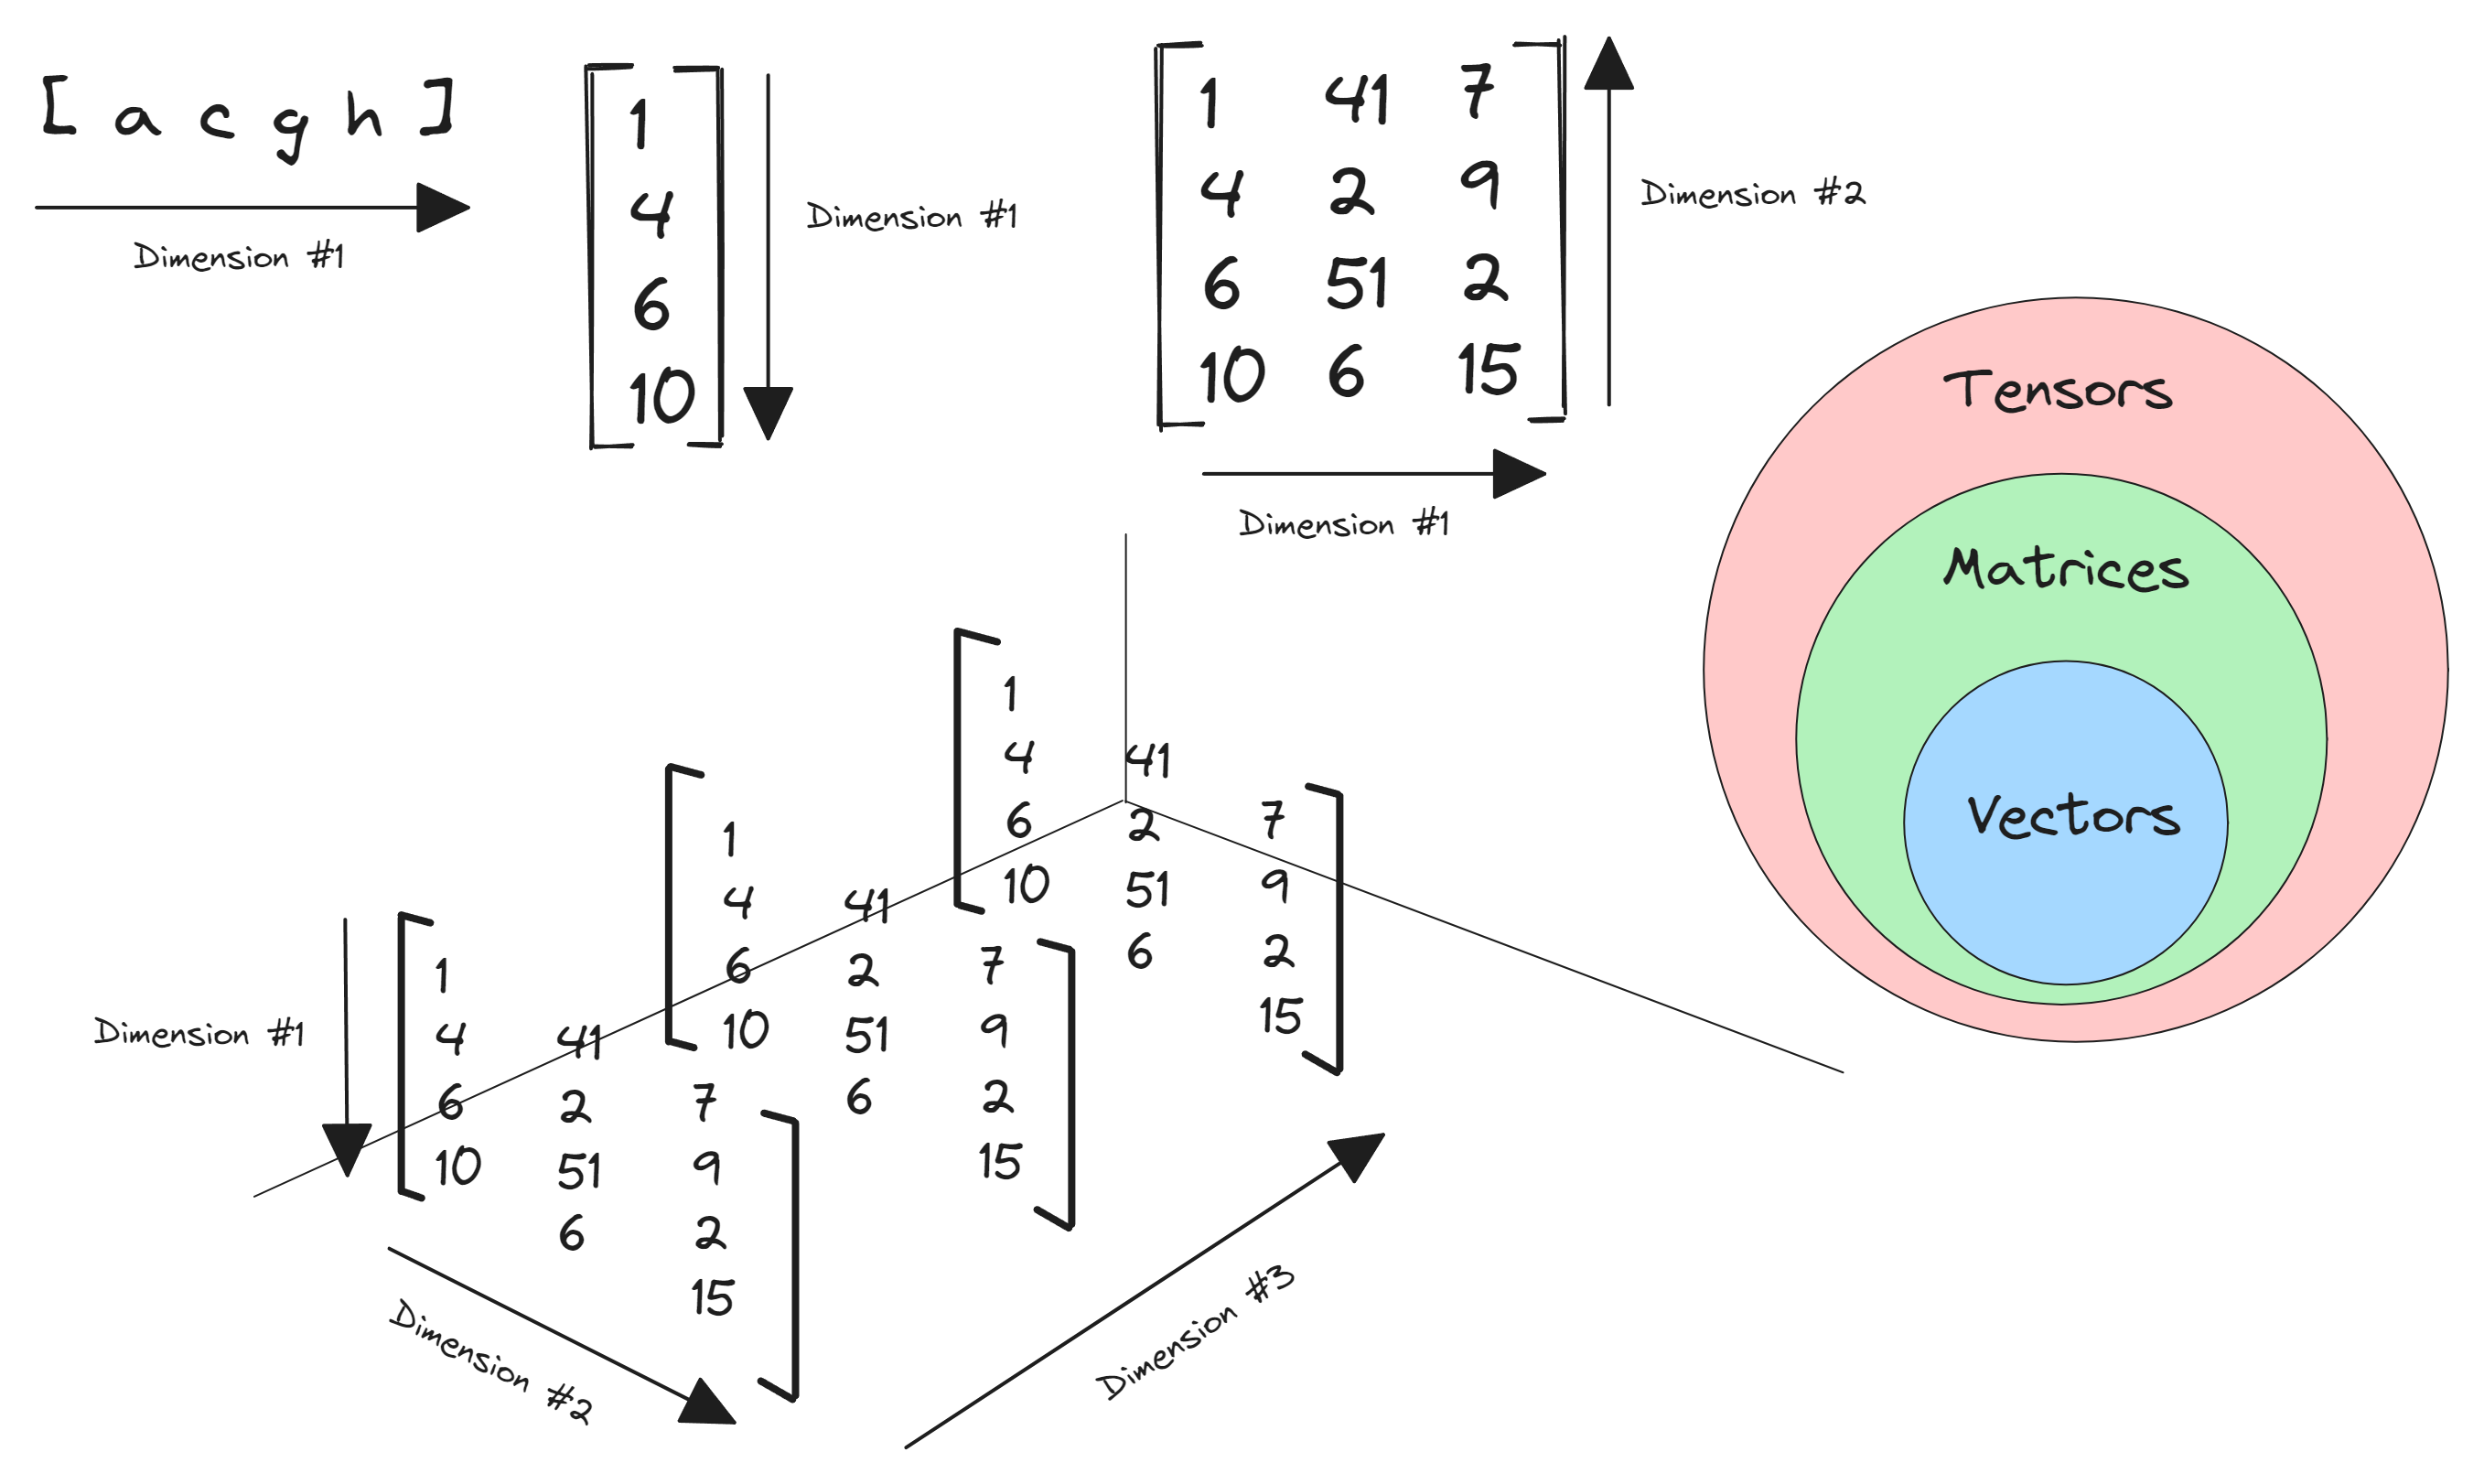 A tensor is an array of data expanding in multiple independent dimensions.